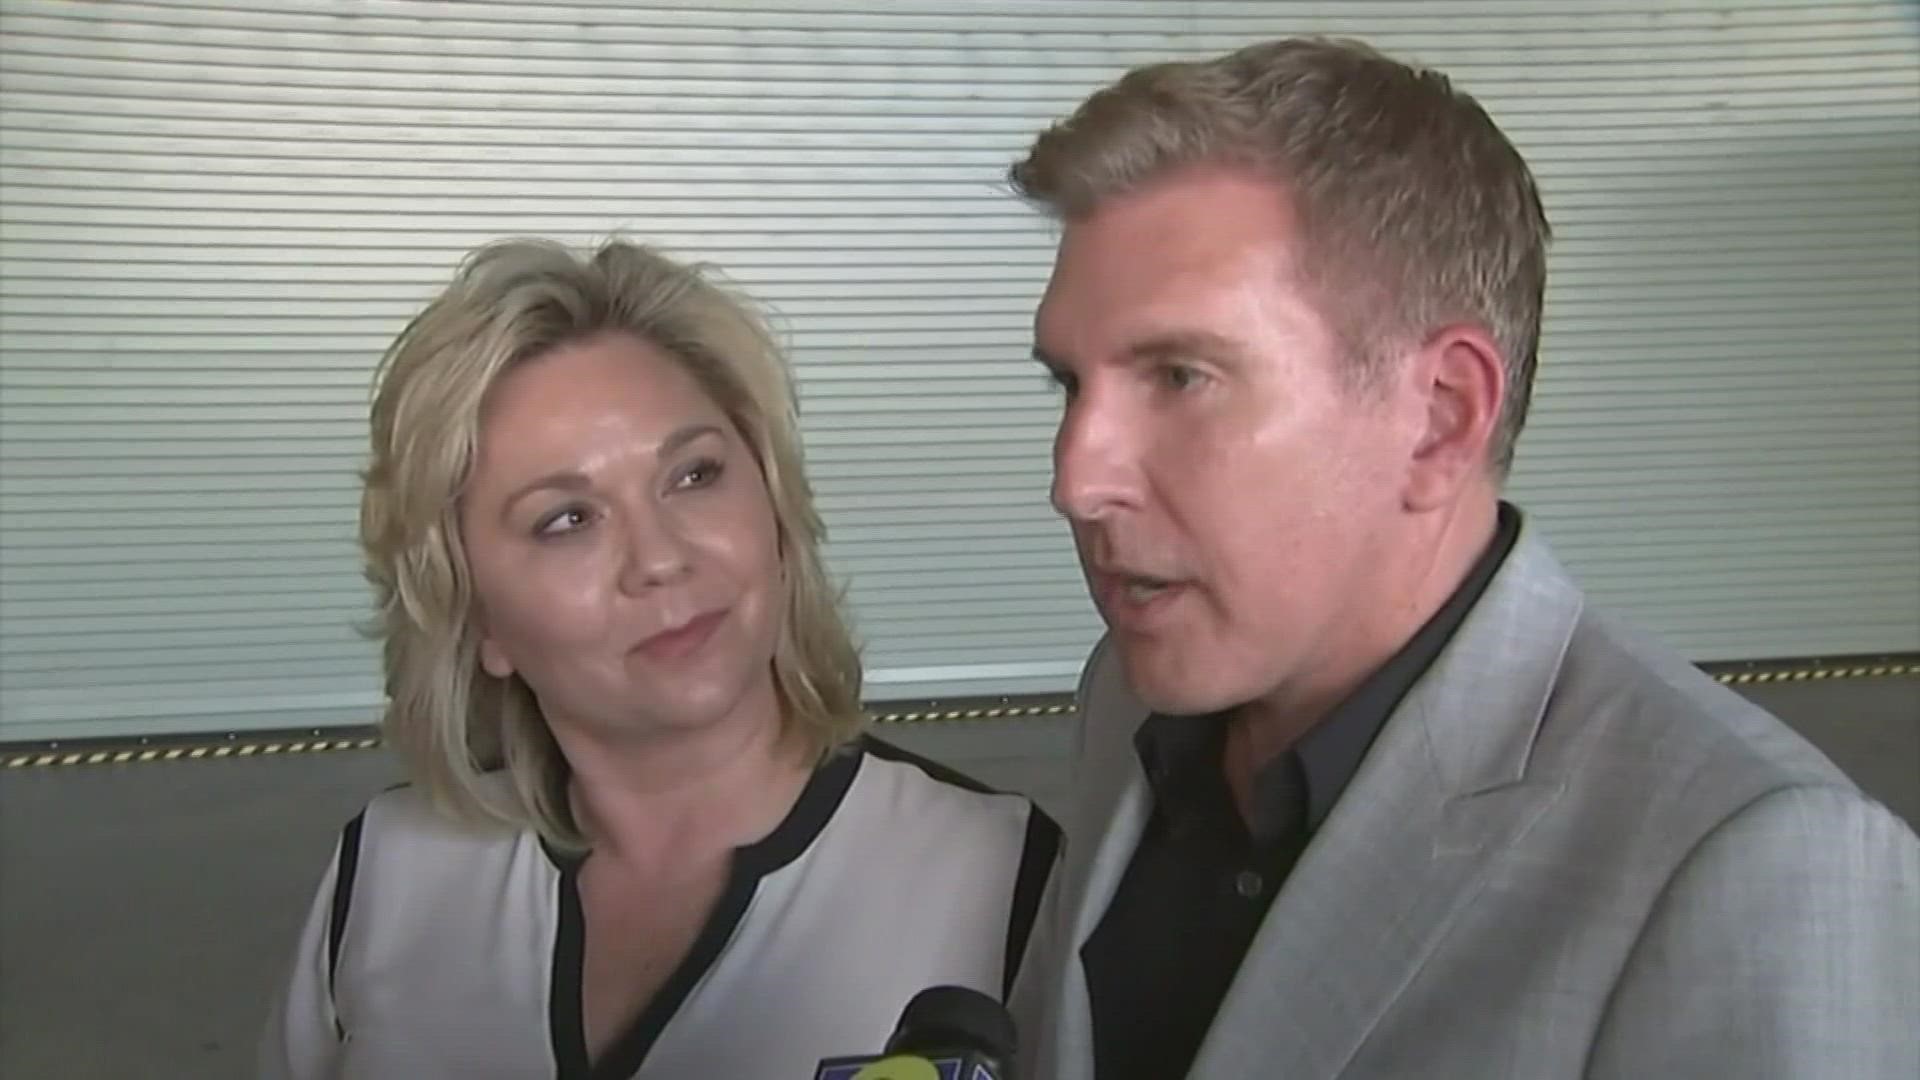 The two "Chrisley Knows Best" reality TV stars were sentenced to years in federal prison for tax evasion and bank fraud.